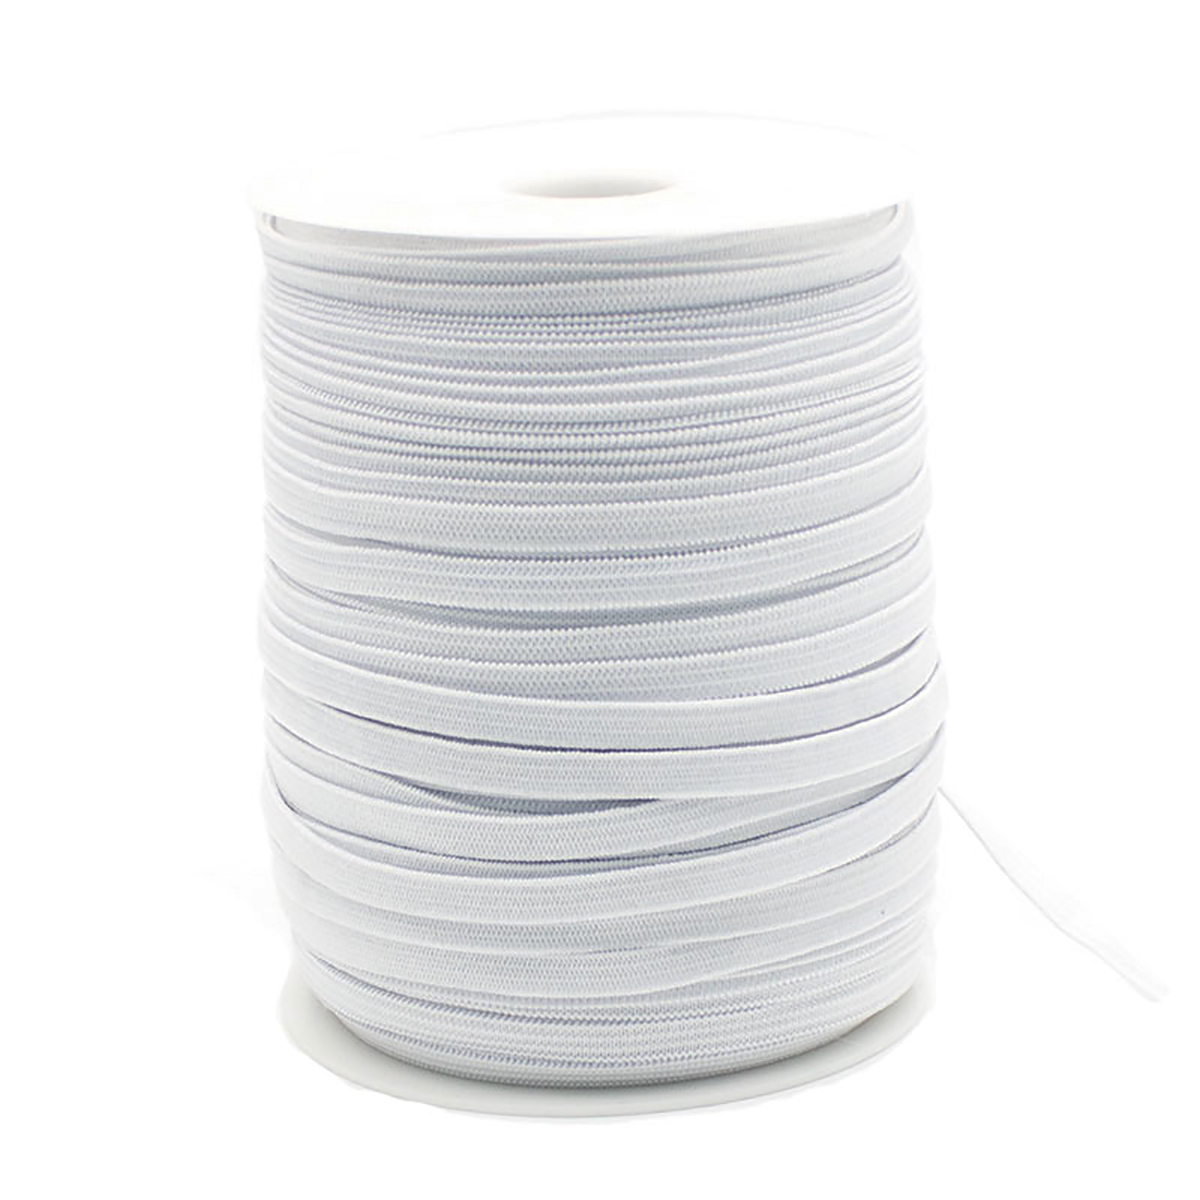 356mm-Elastic-Band-Cord-Knits-100-Meter-Length-Mouth-Hat-Stretch-DIY-Sewing-1701161-10